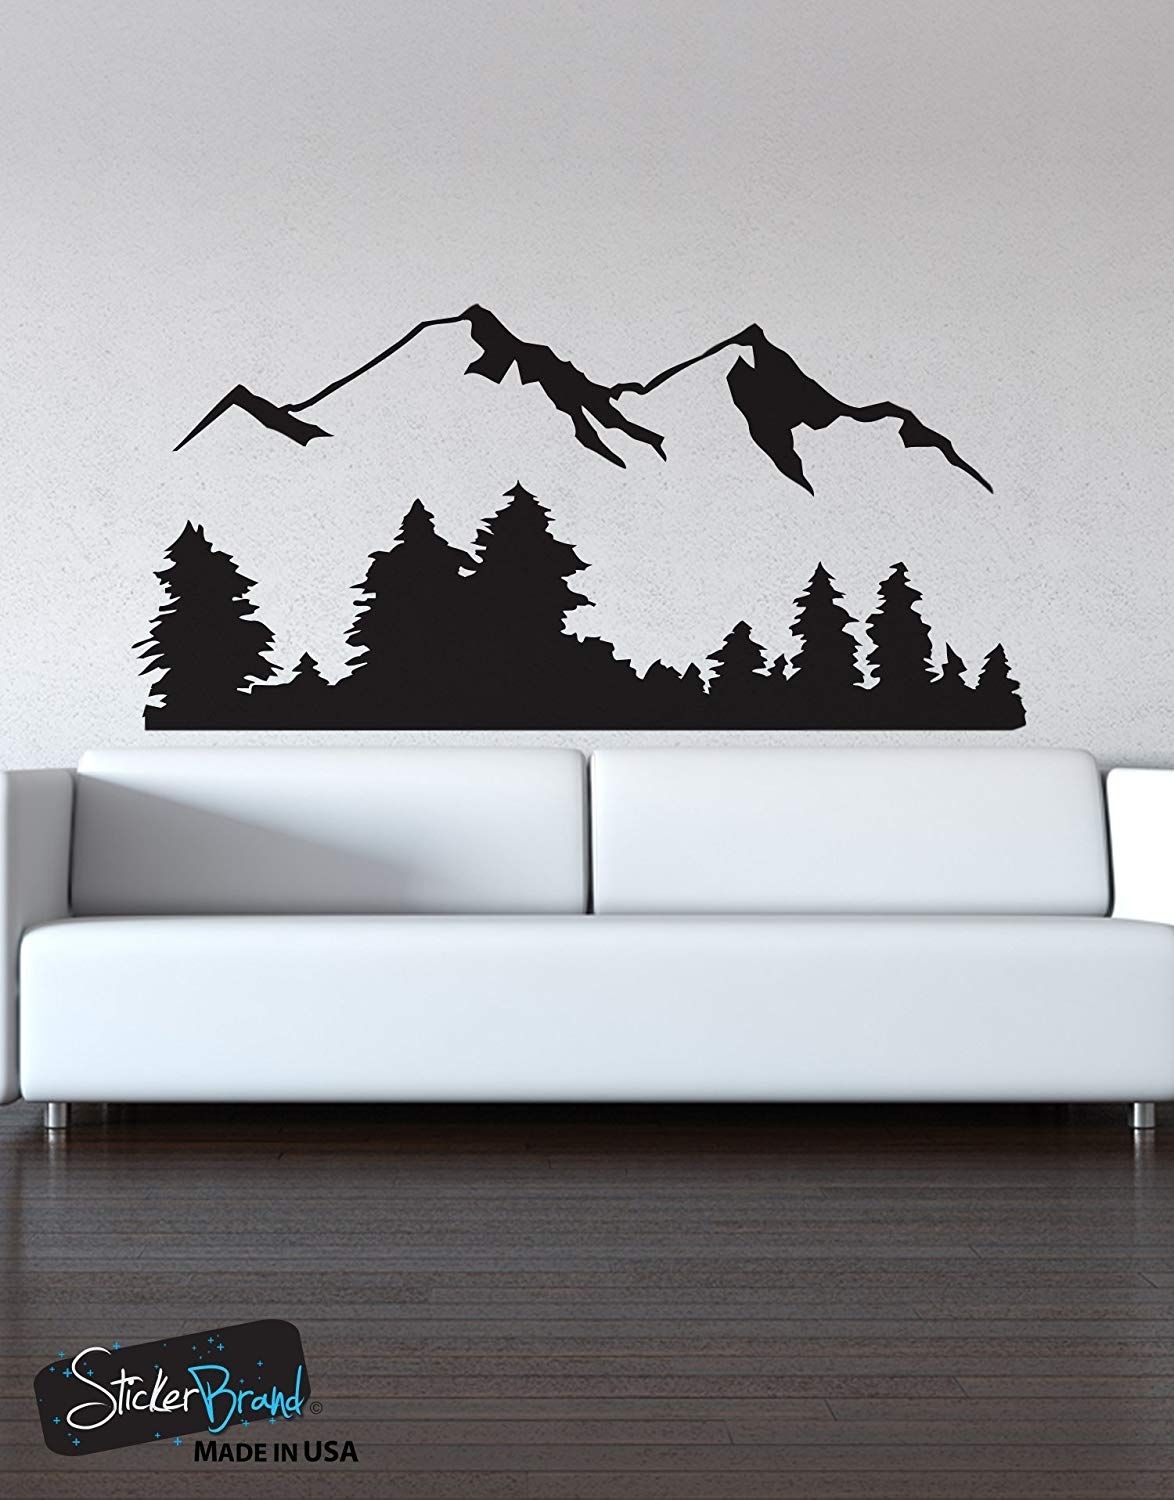 Amazon: Stickerbrand Landscapes Vinyl Wall Art Snowy Mountain For Vinyl Wall Art (View 4 of 20)